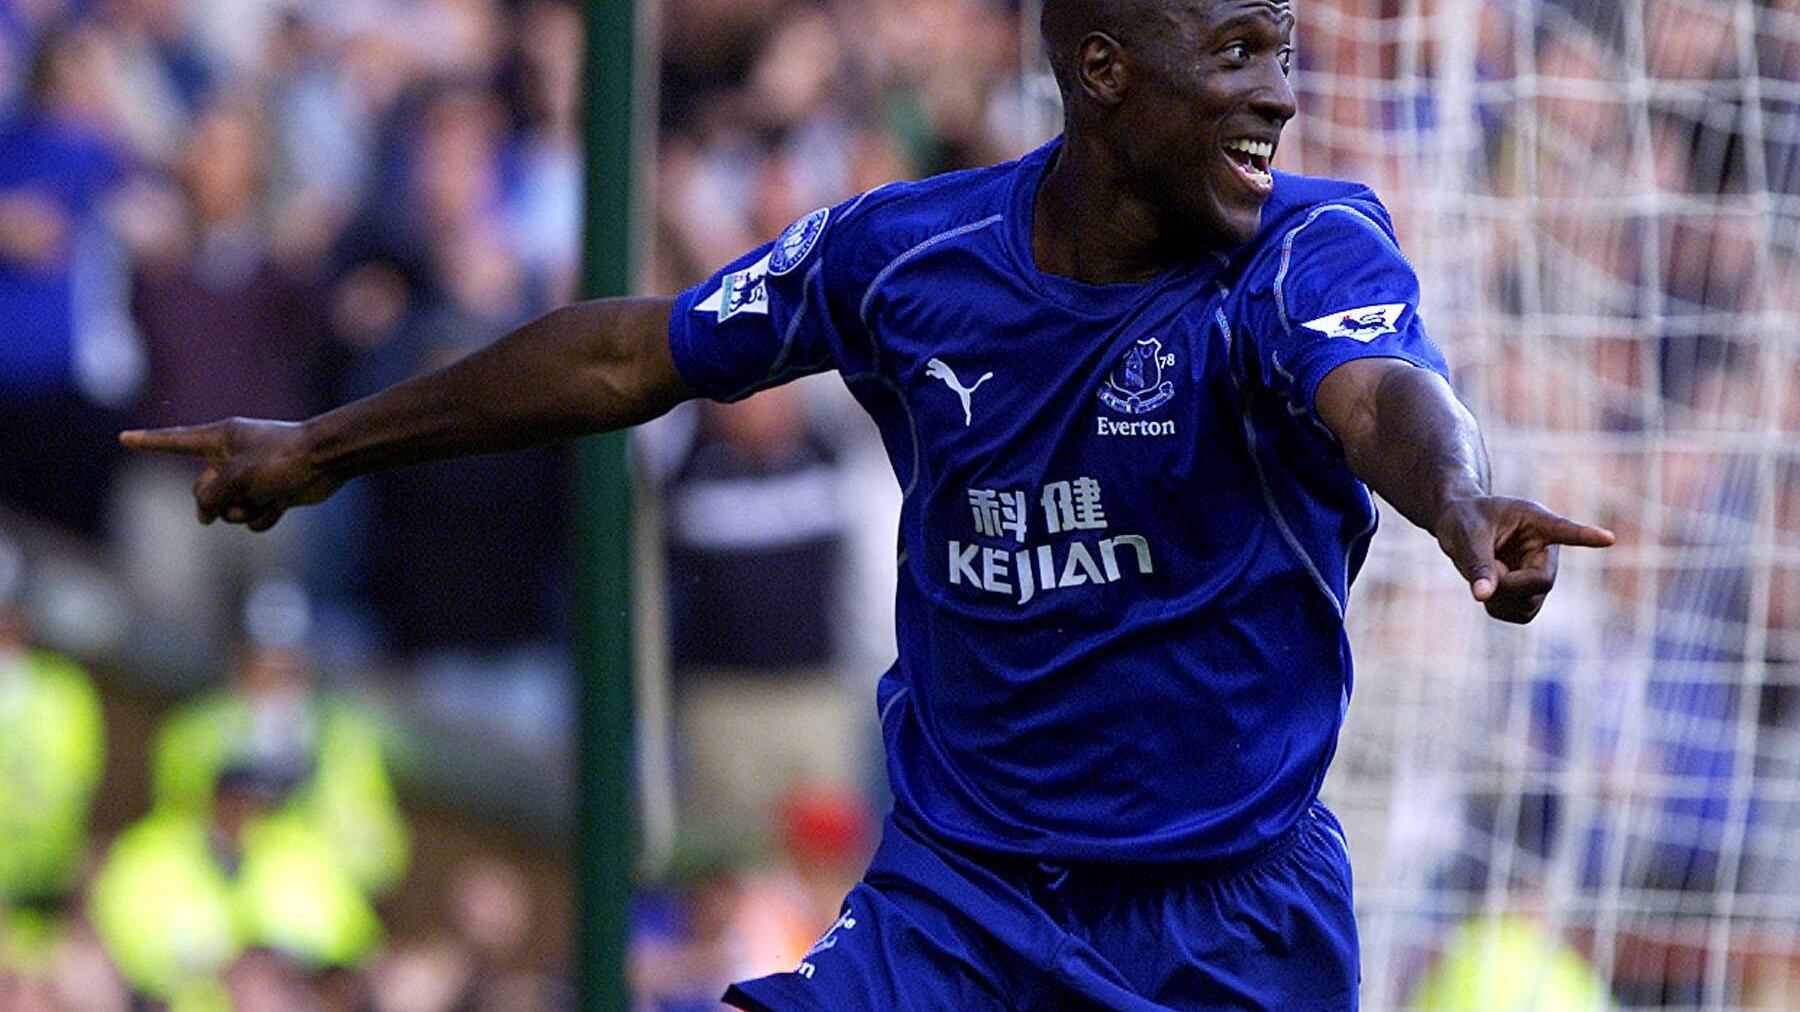 Former Everton and Arsenal striker Kevin Campbell has died at the age of 54